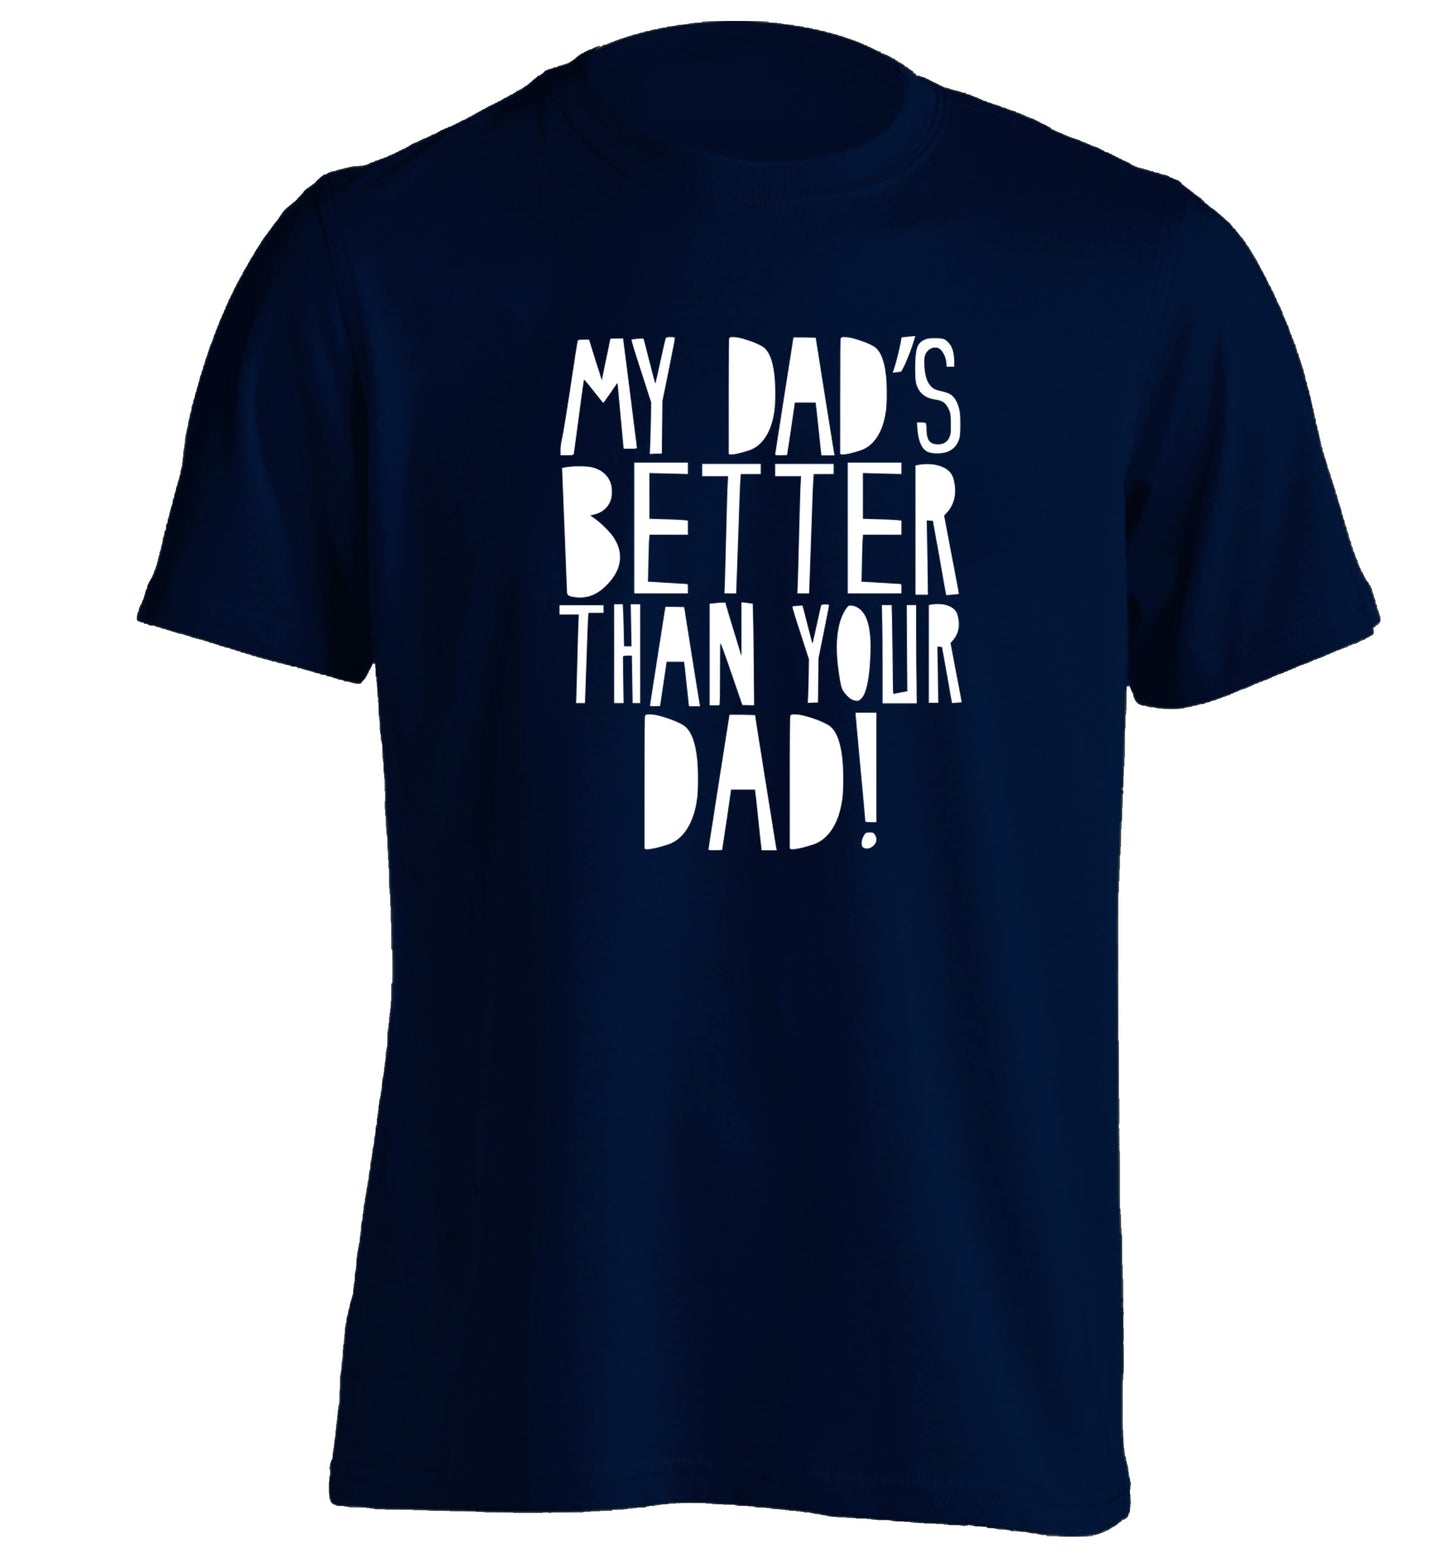 My dad's better than your dad adults unisex navy Tshirt 2XL